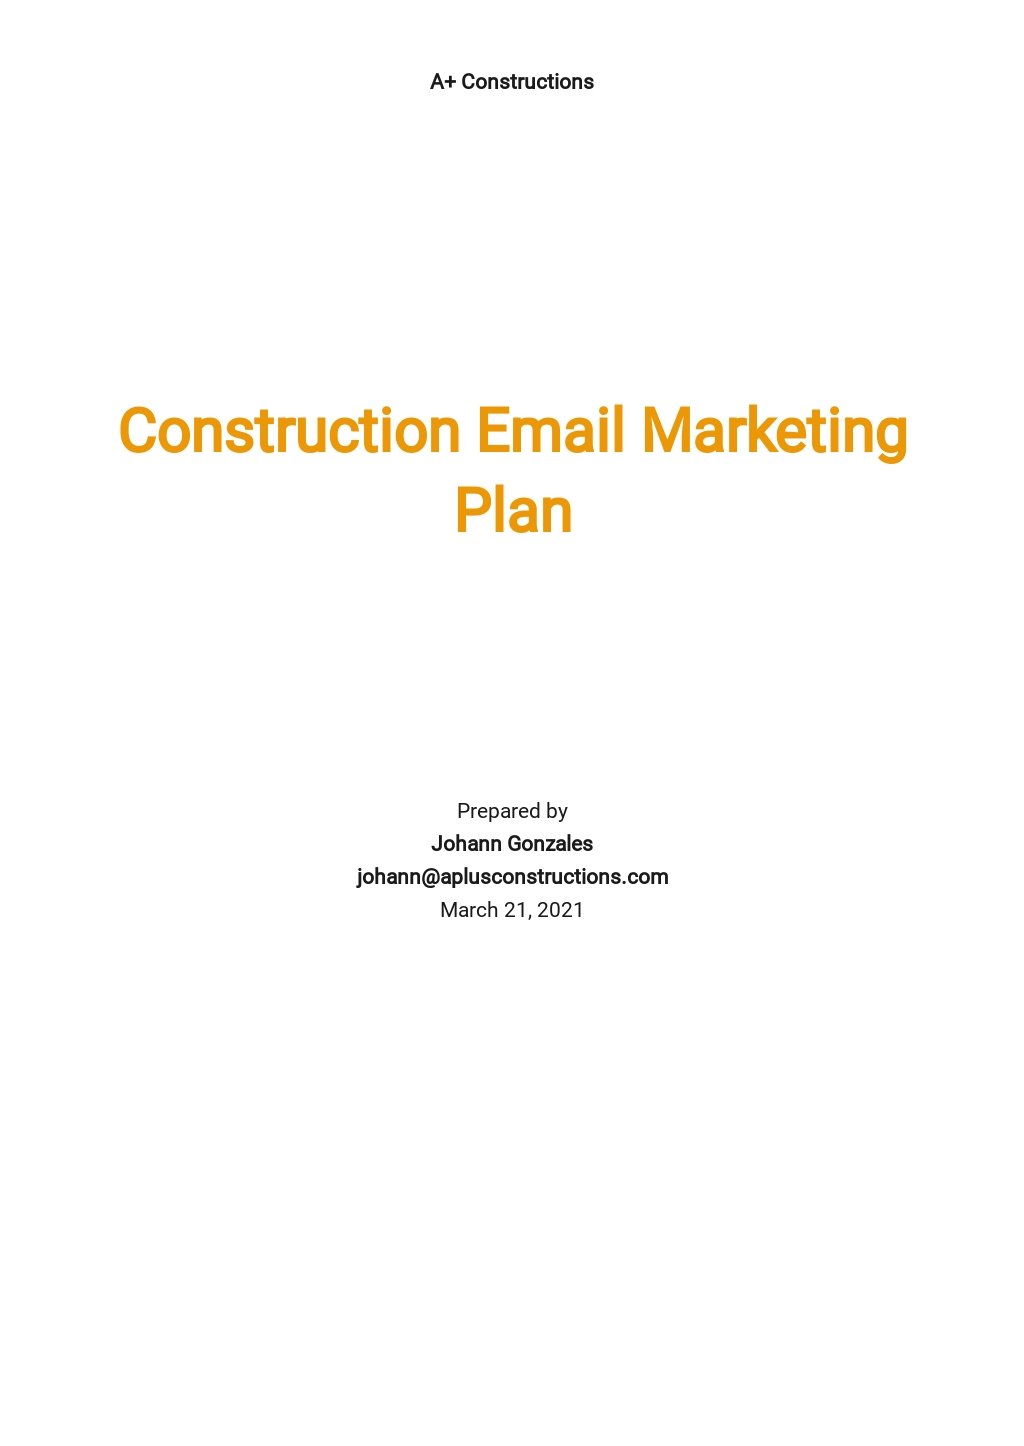 Construction Email Marketing Plan Template.jpe